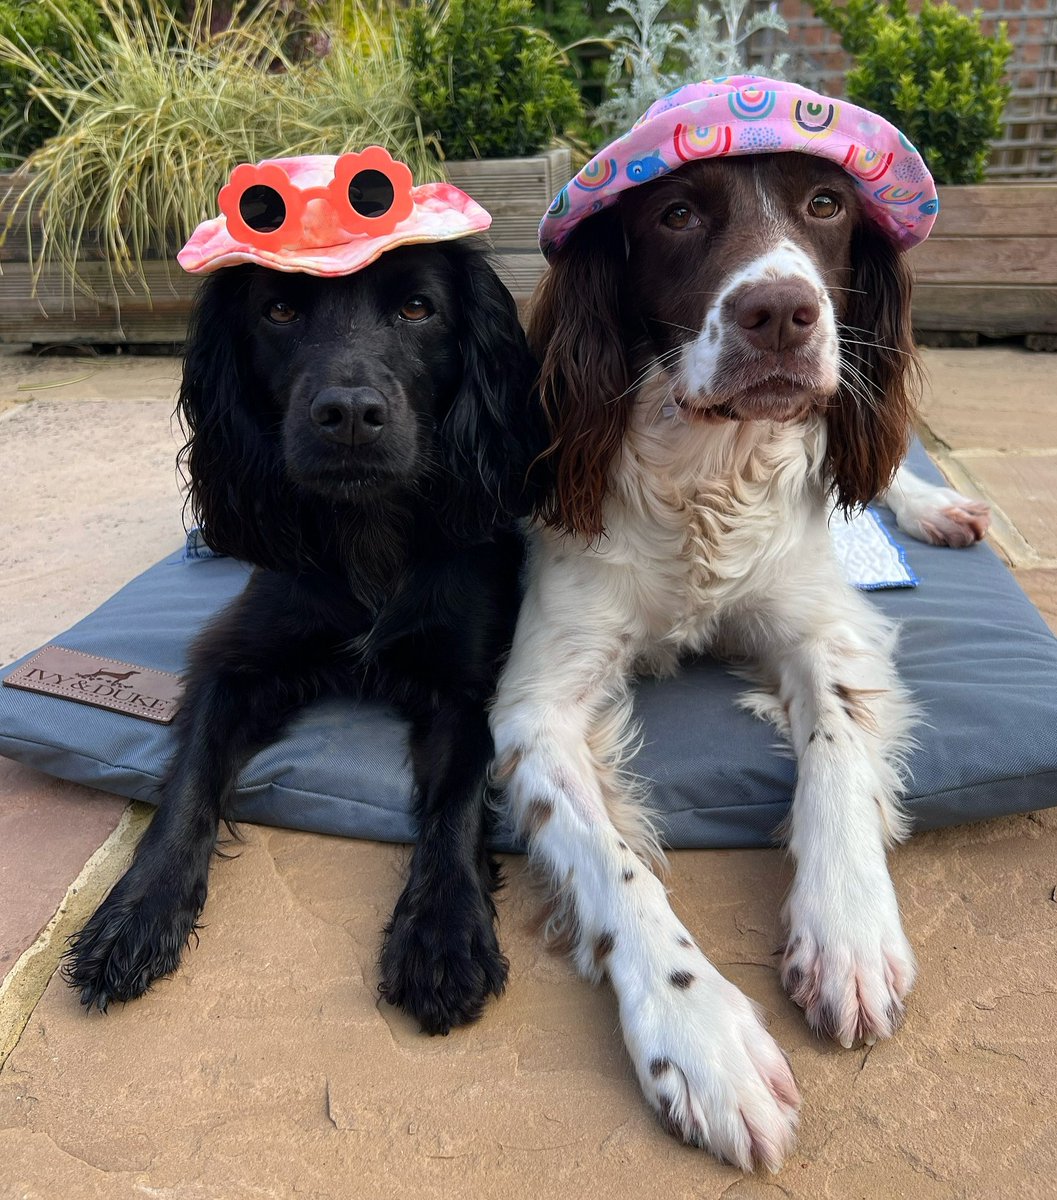 We're just hoping for some consistent warm weather this year.... is it too much to ask🥺🤣?! When the suns out, make sure your pups look and stay just as cool as instagram.com/hazelandwillow… do in our cute hats🌞! Who else has a pup who’d look cute in these🐶?!